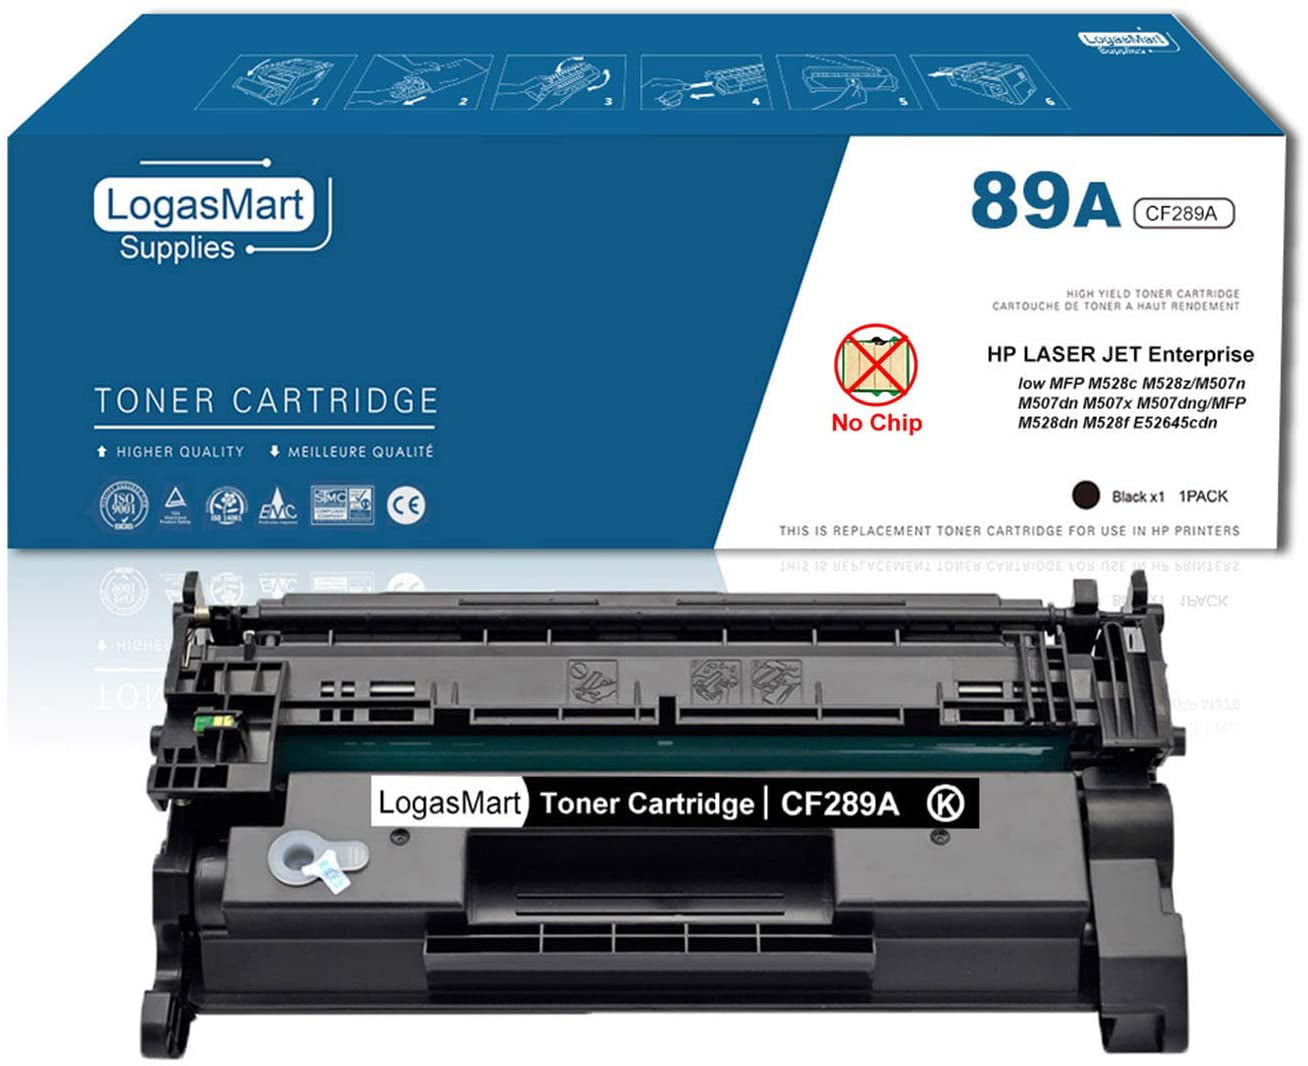 CF289A High Yield Toner Cartridge Replacement for HP Enterprise M507n M507dn M507x M507dng MFP M528dn M528c M528f M528z Printer. 1 Pack Black Compatible 89A 